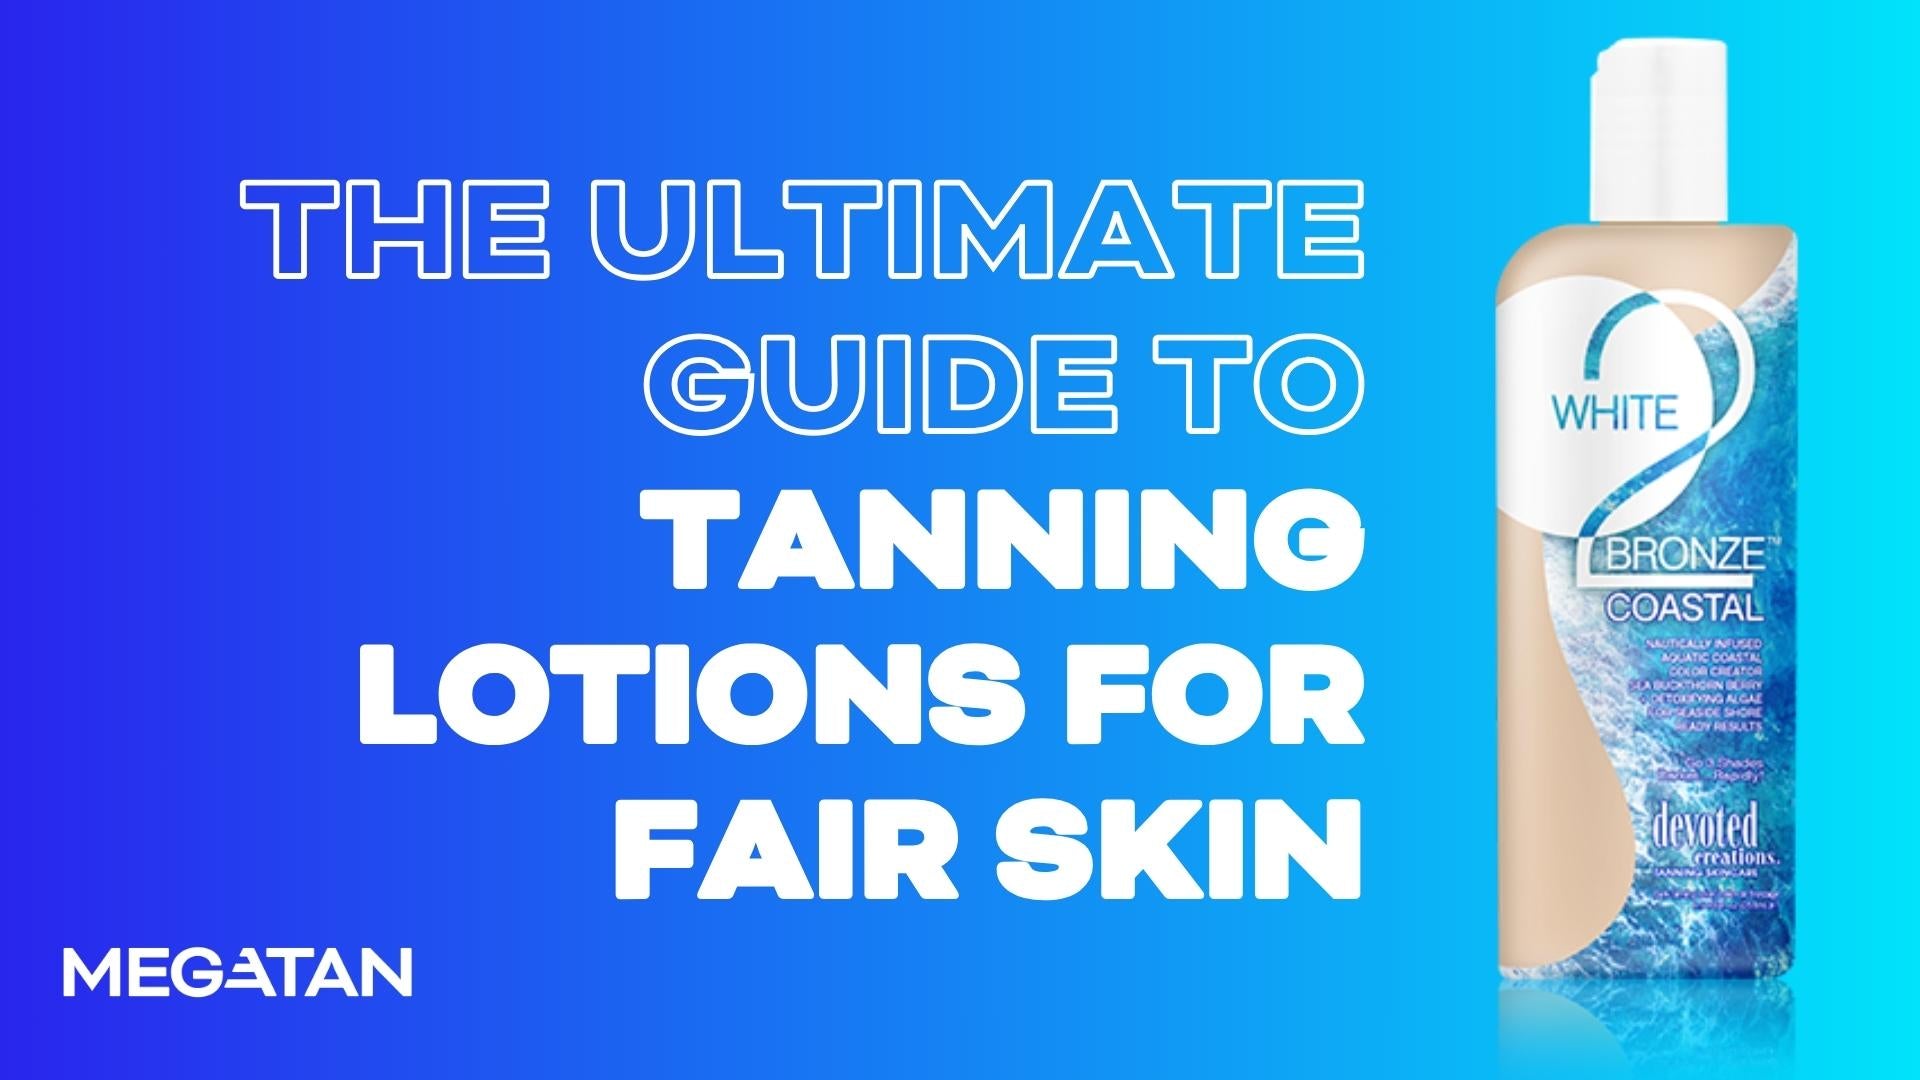 The Ultimate Guide to Tanning Lotions for Fair Skin